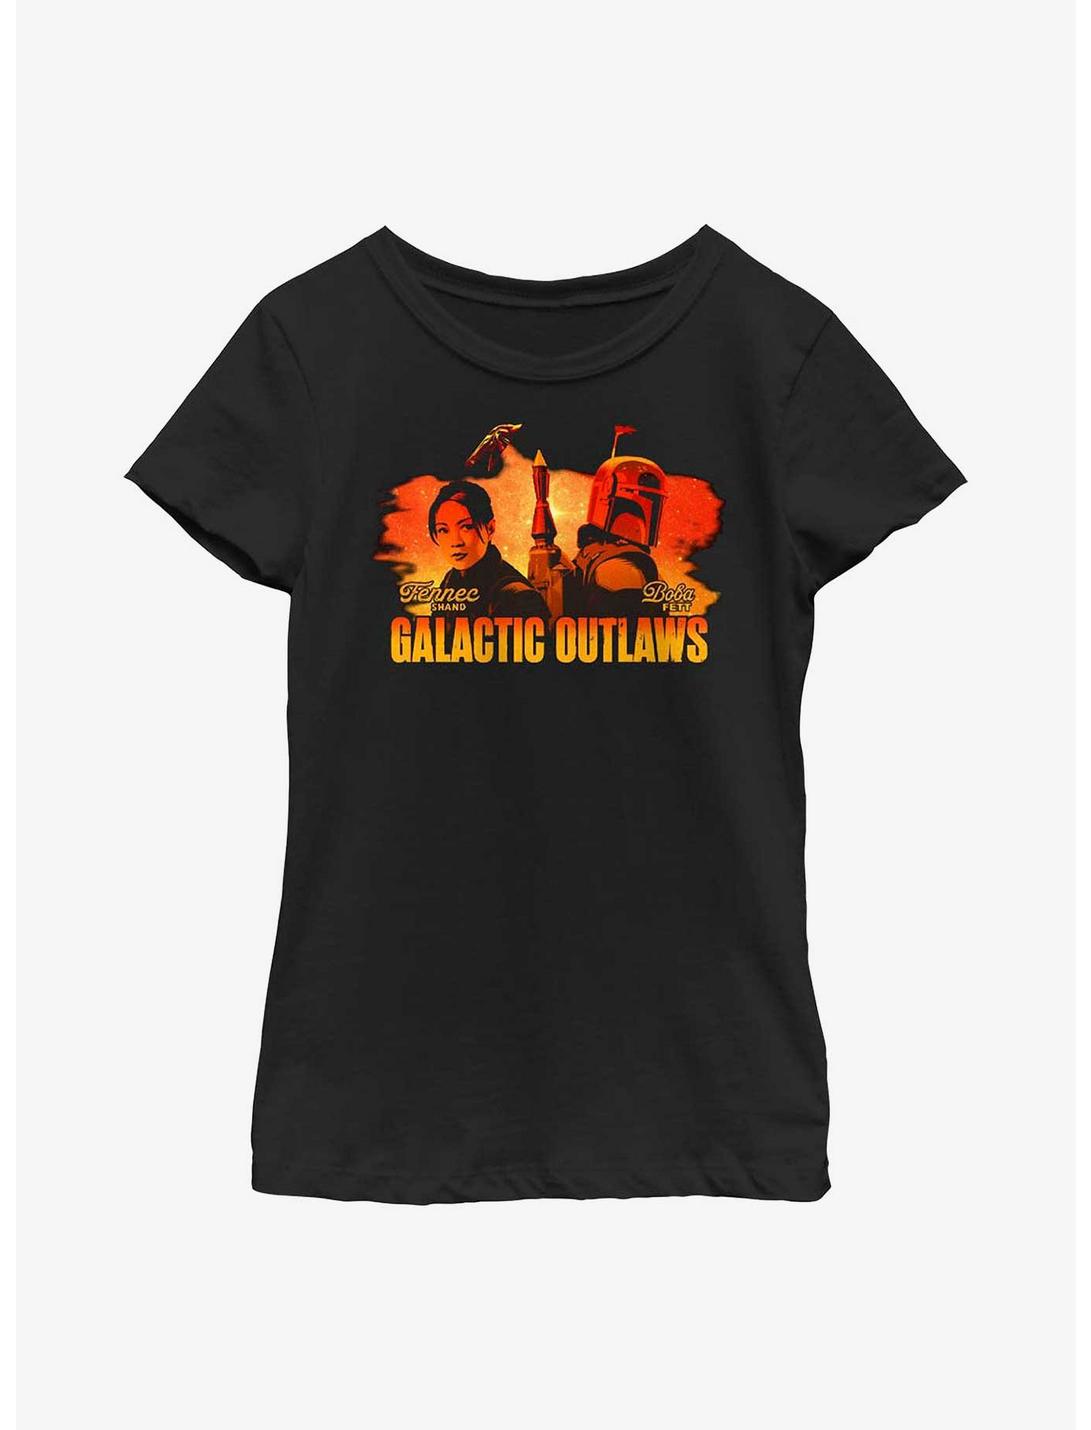 Star Wars: The Book Of Boba Fett Galactic Outlaws Sunset Youth Girls T-Shirt, BLACK, hi-res